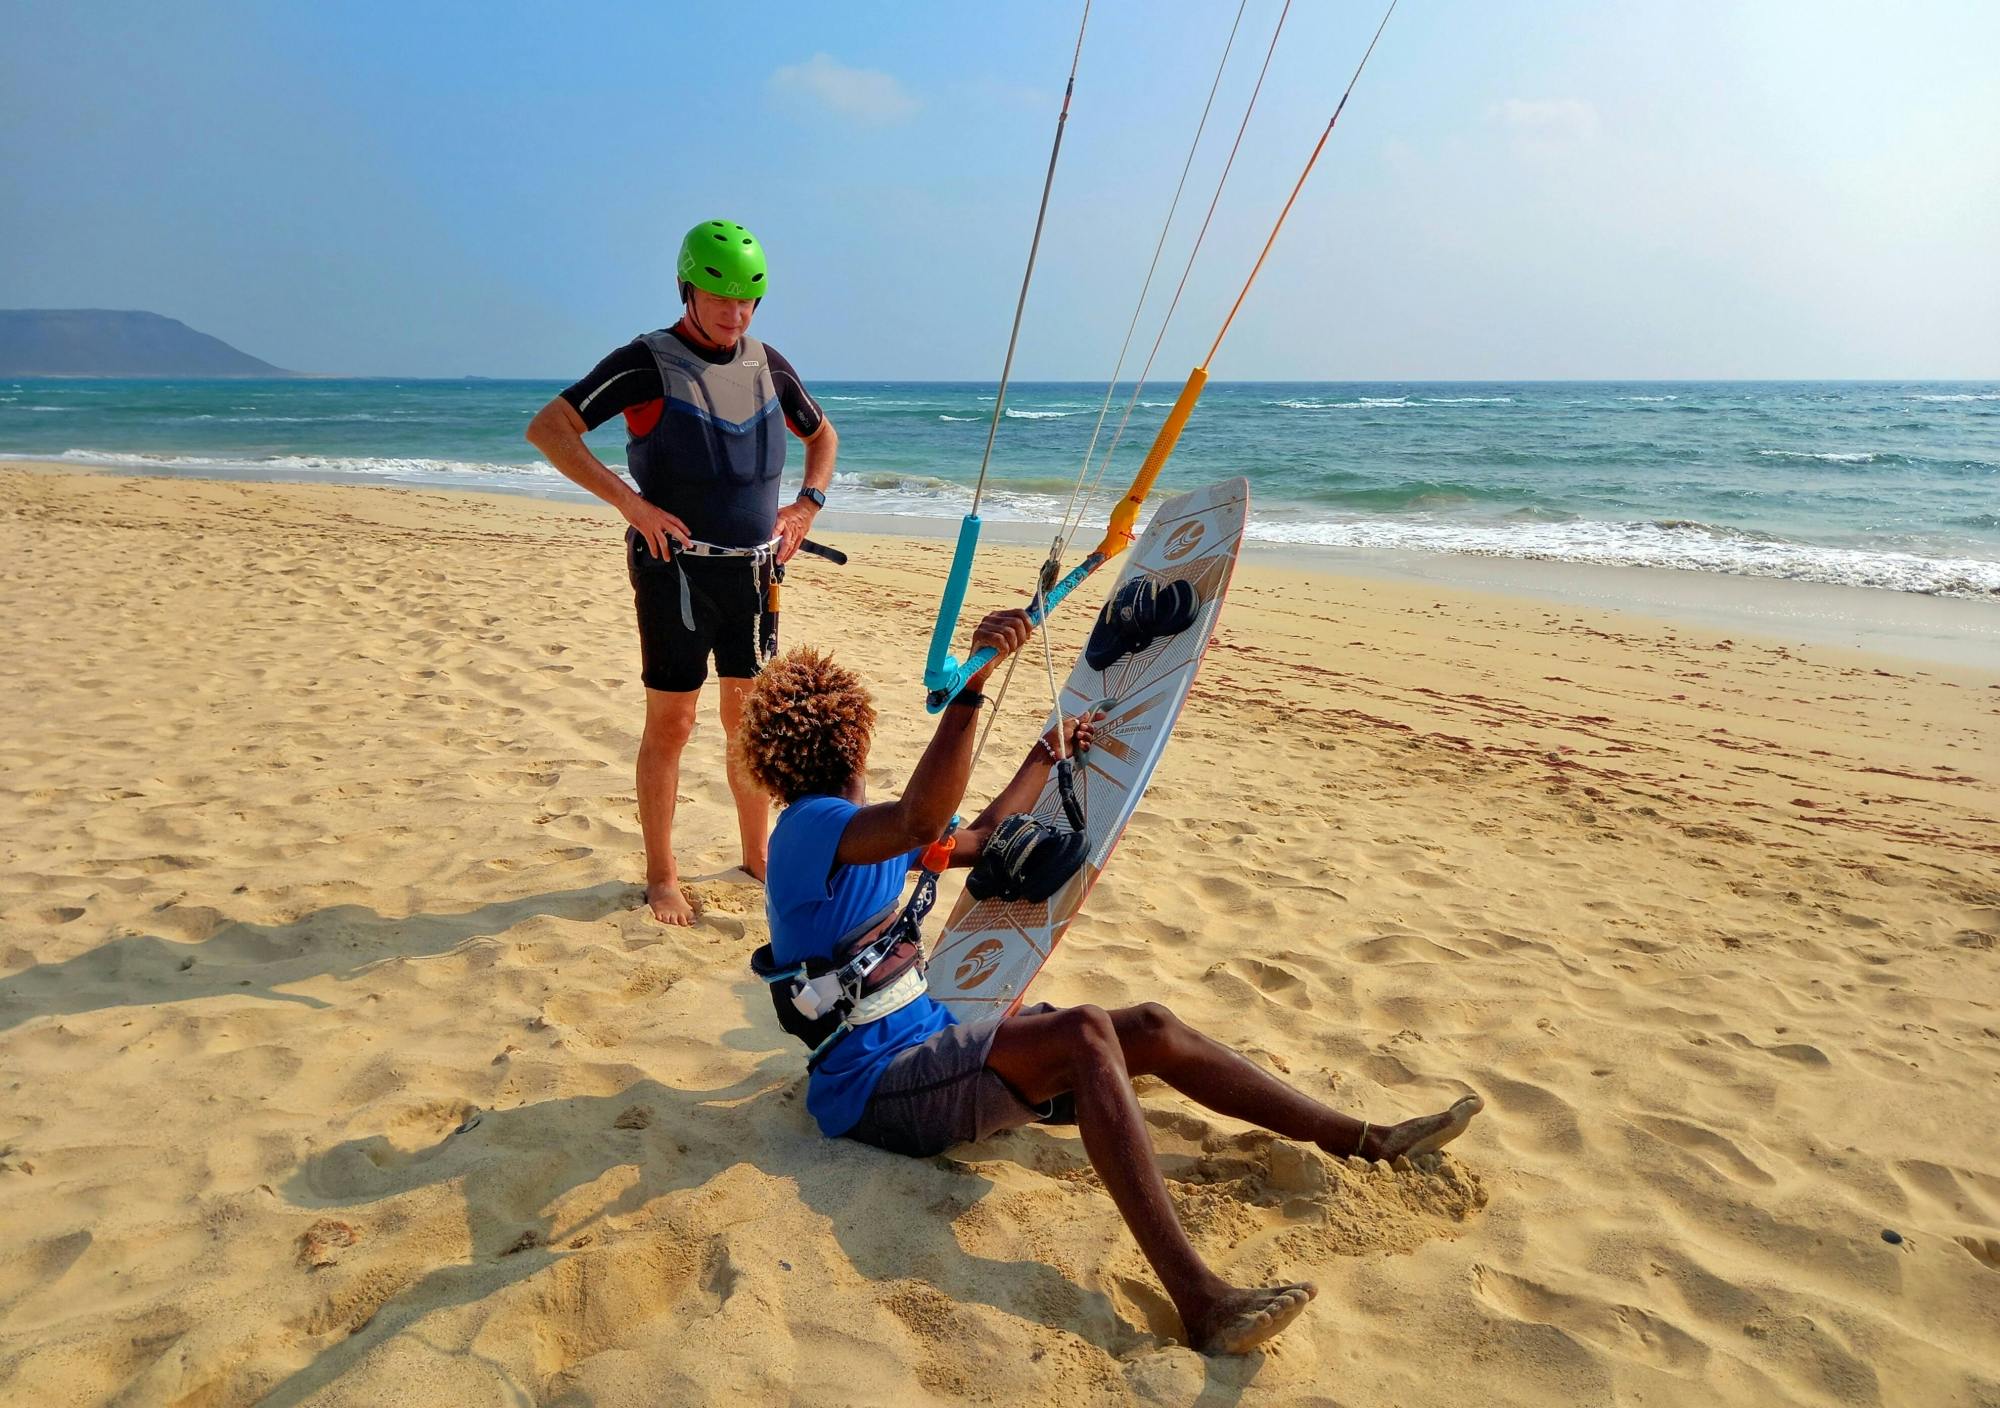 Cape Verde Kite Surfing Lesson with Atlantic Star